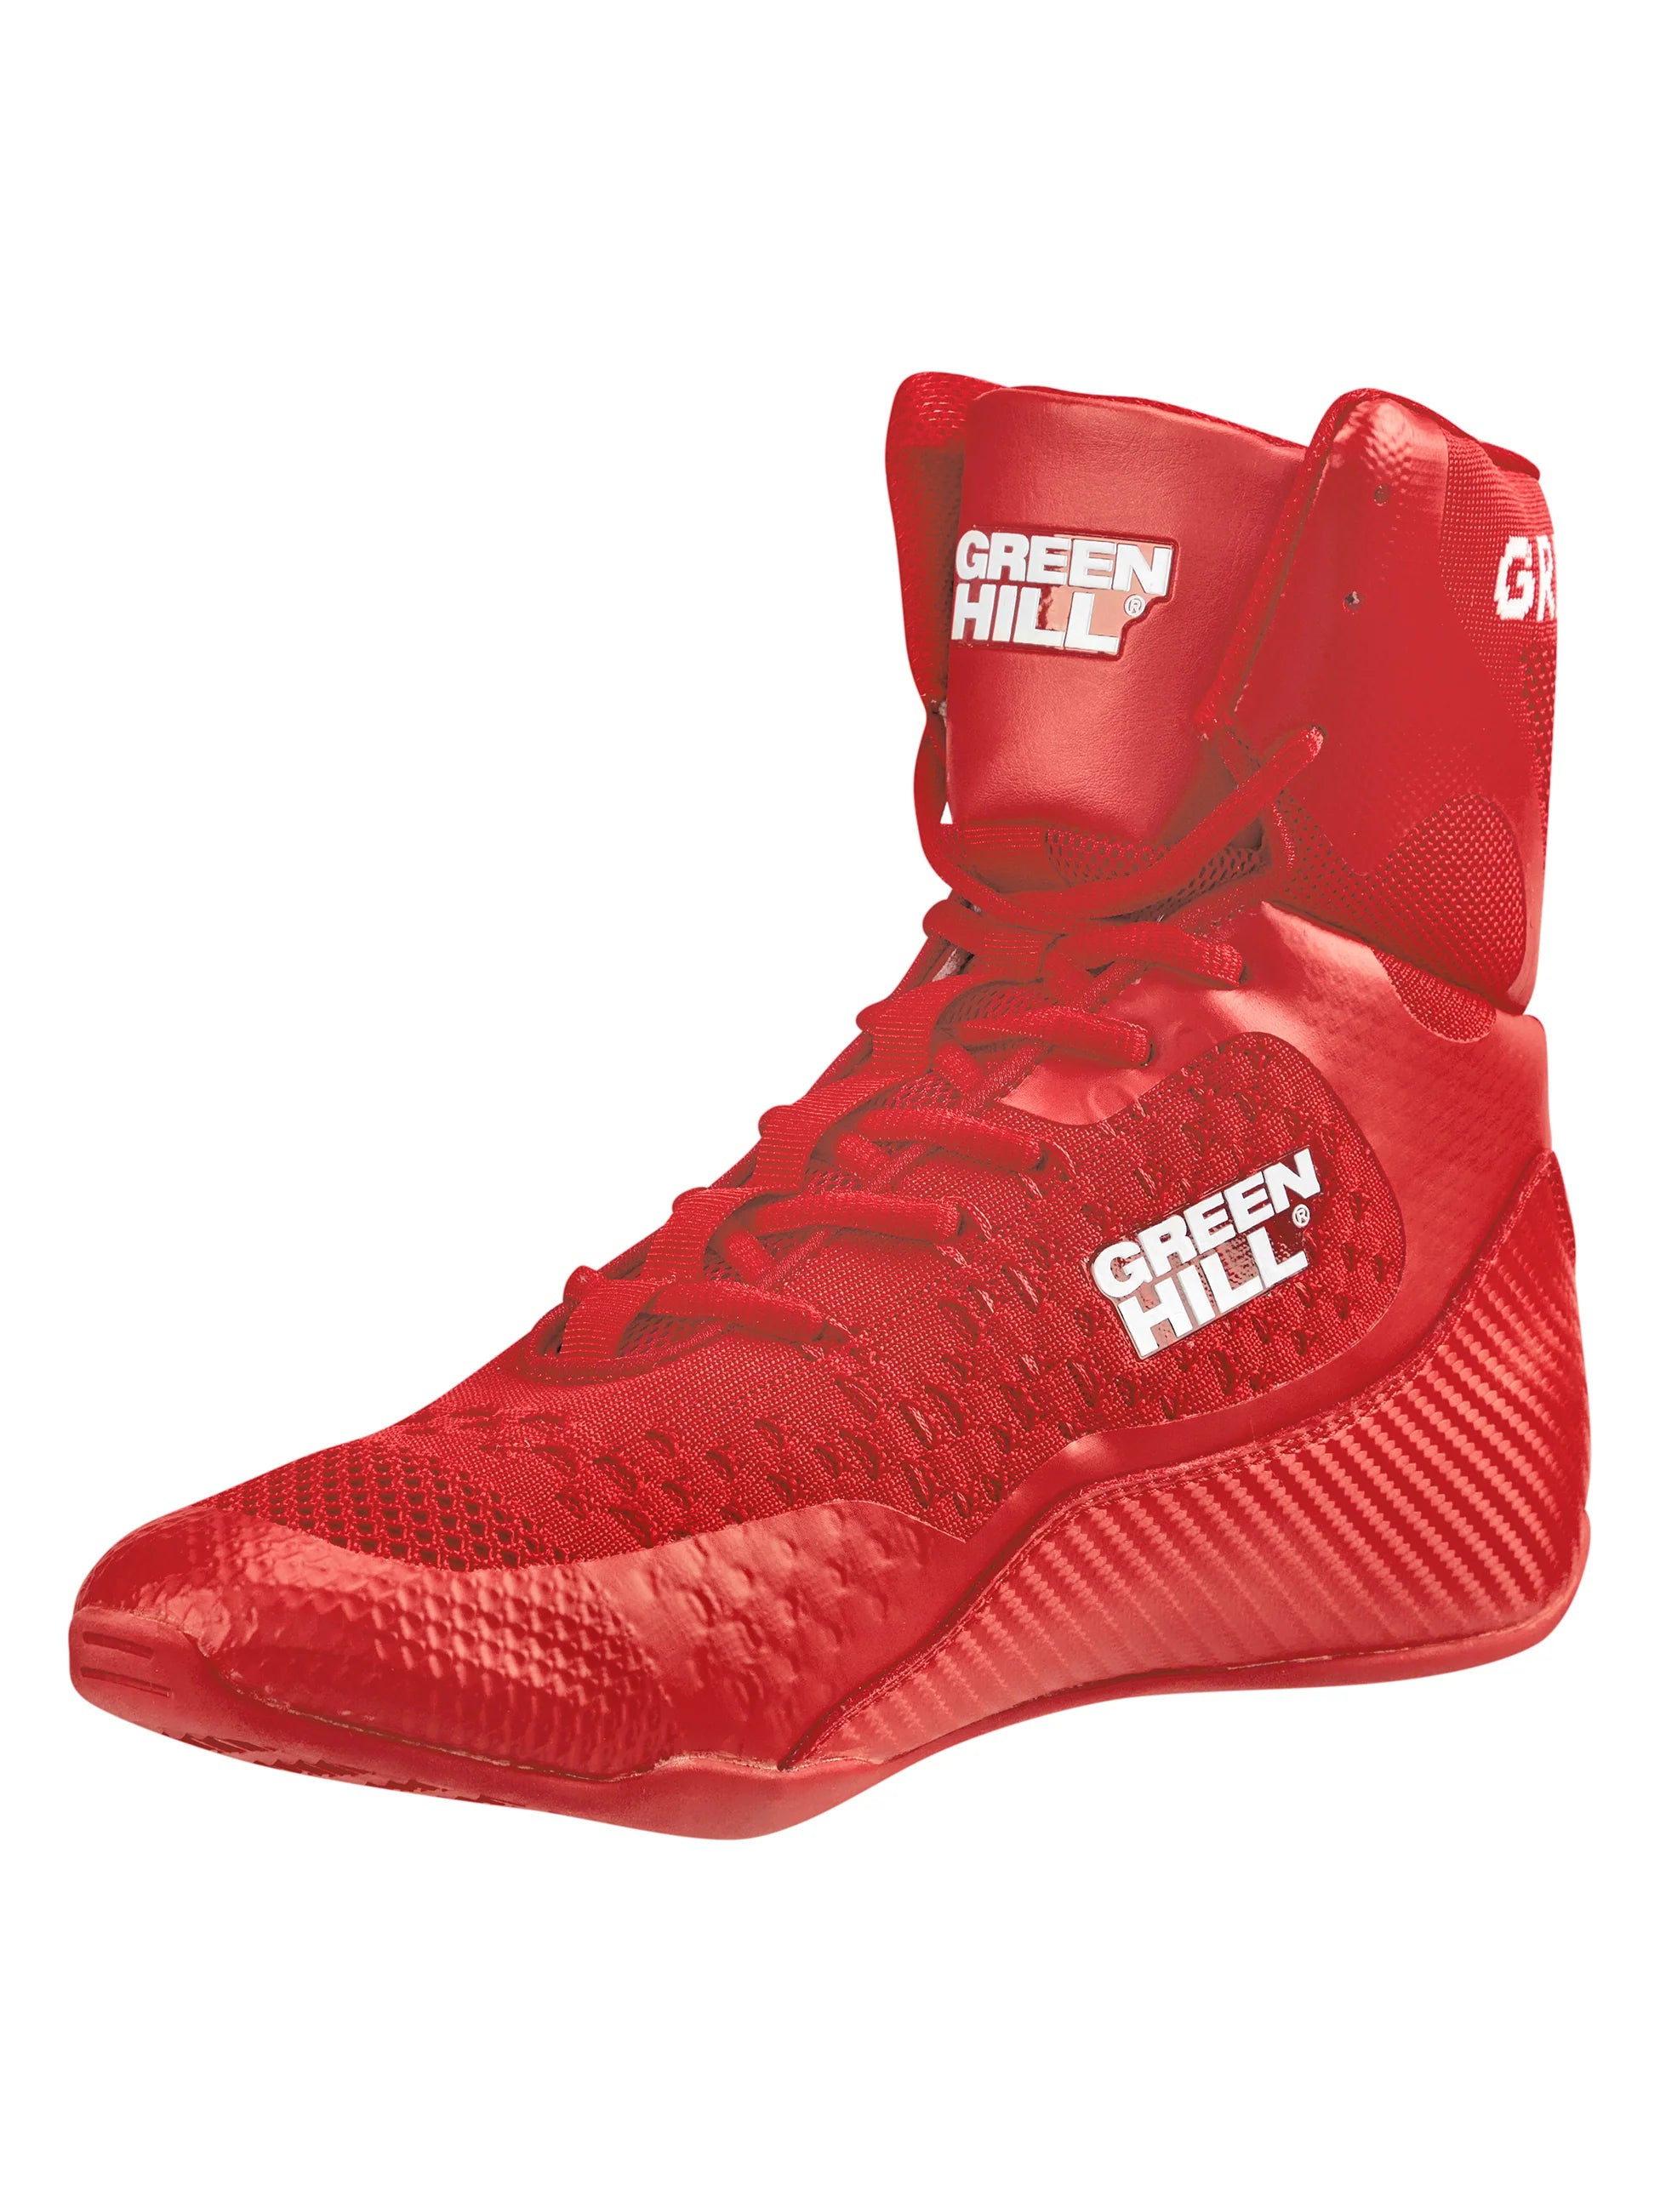 red boxing shoes